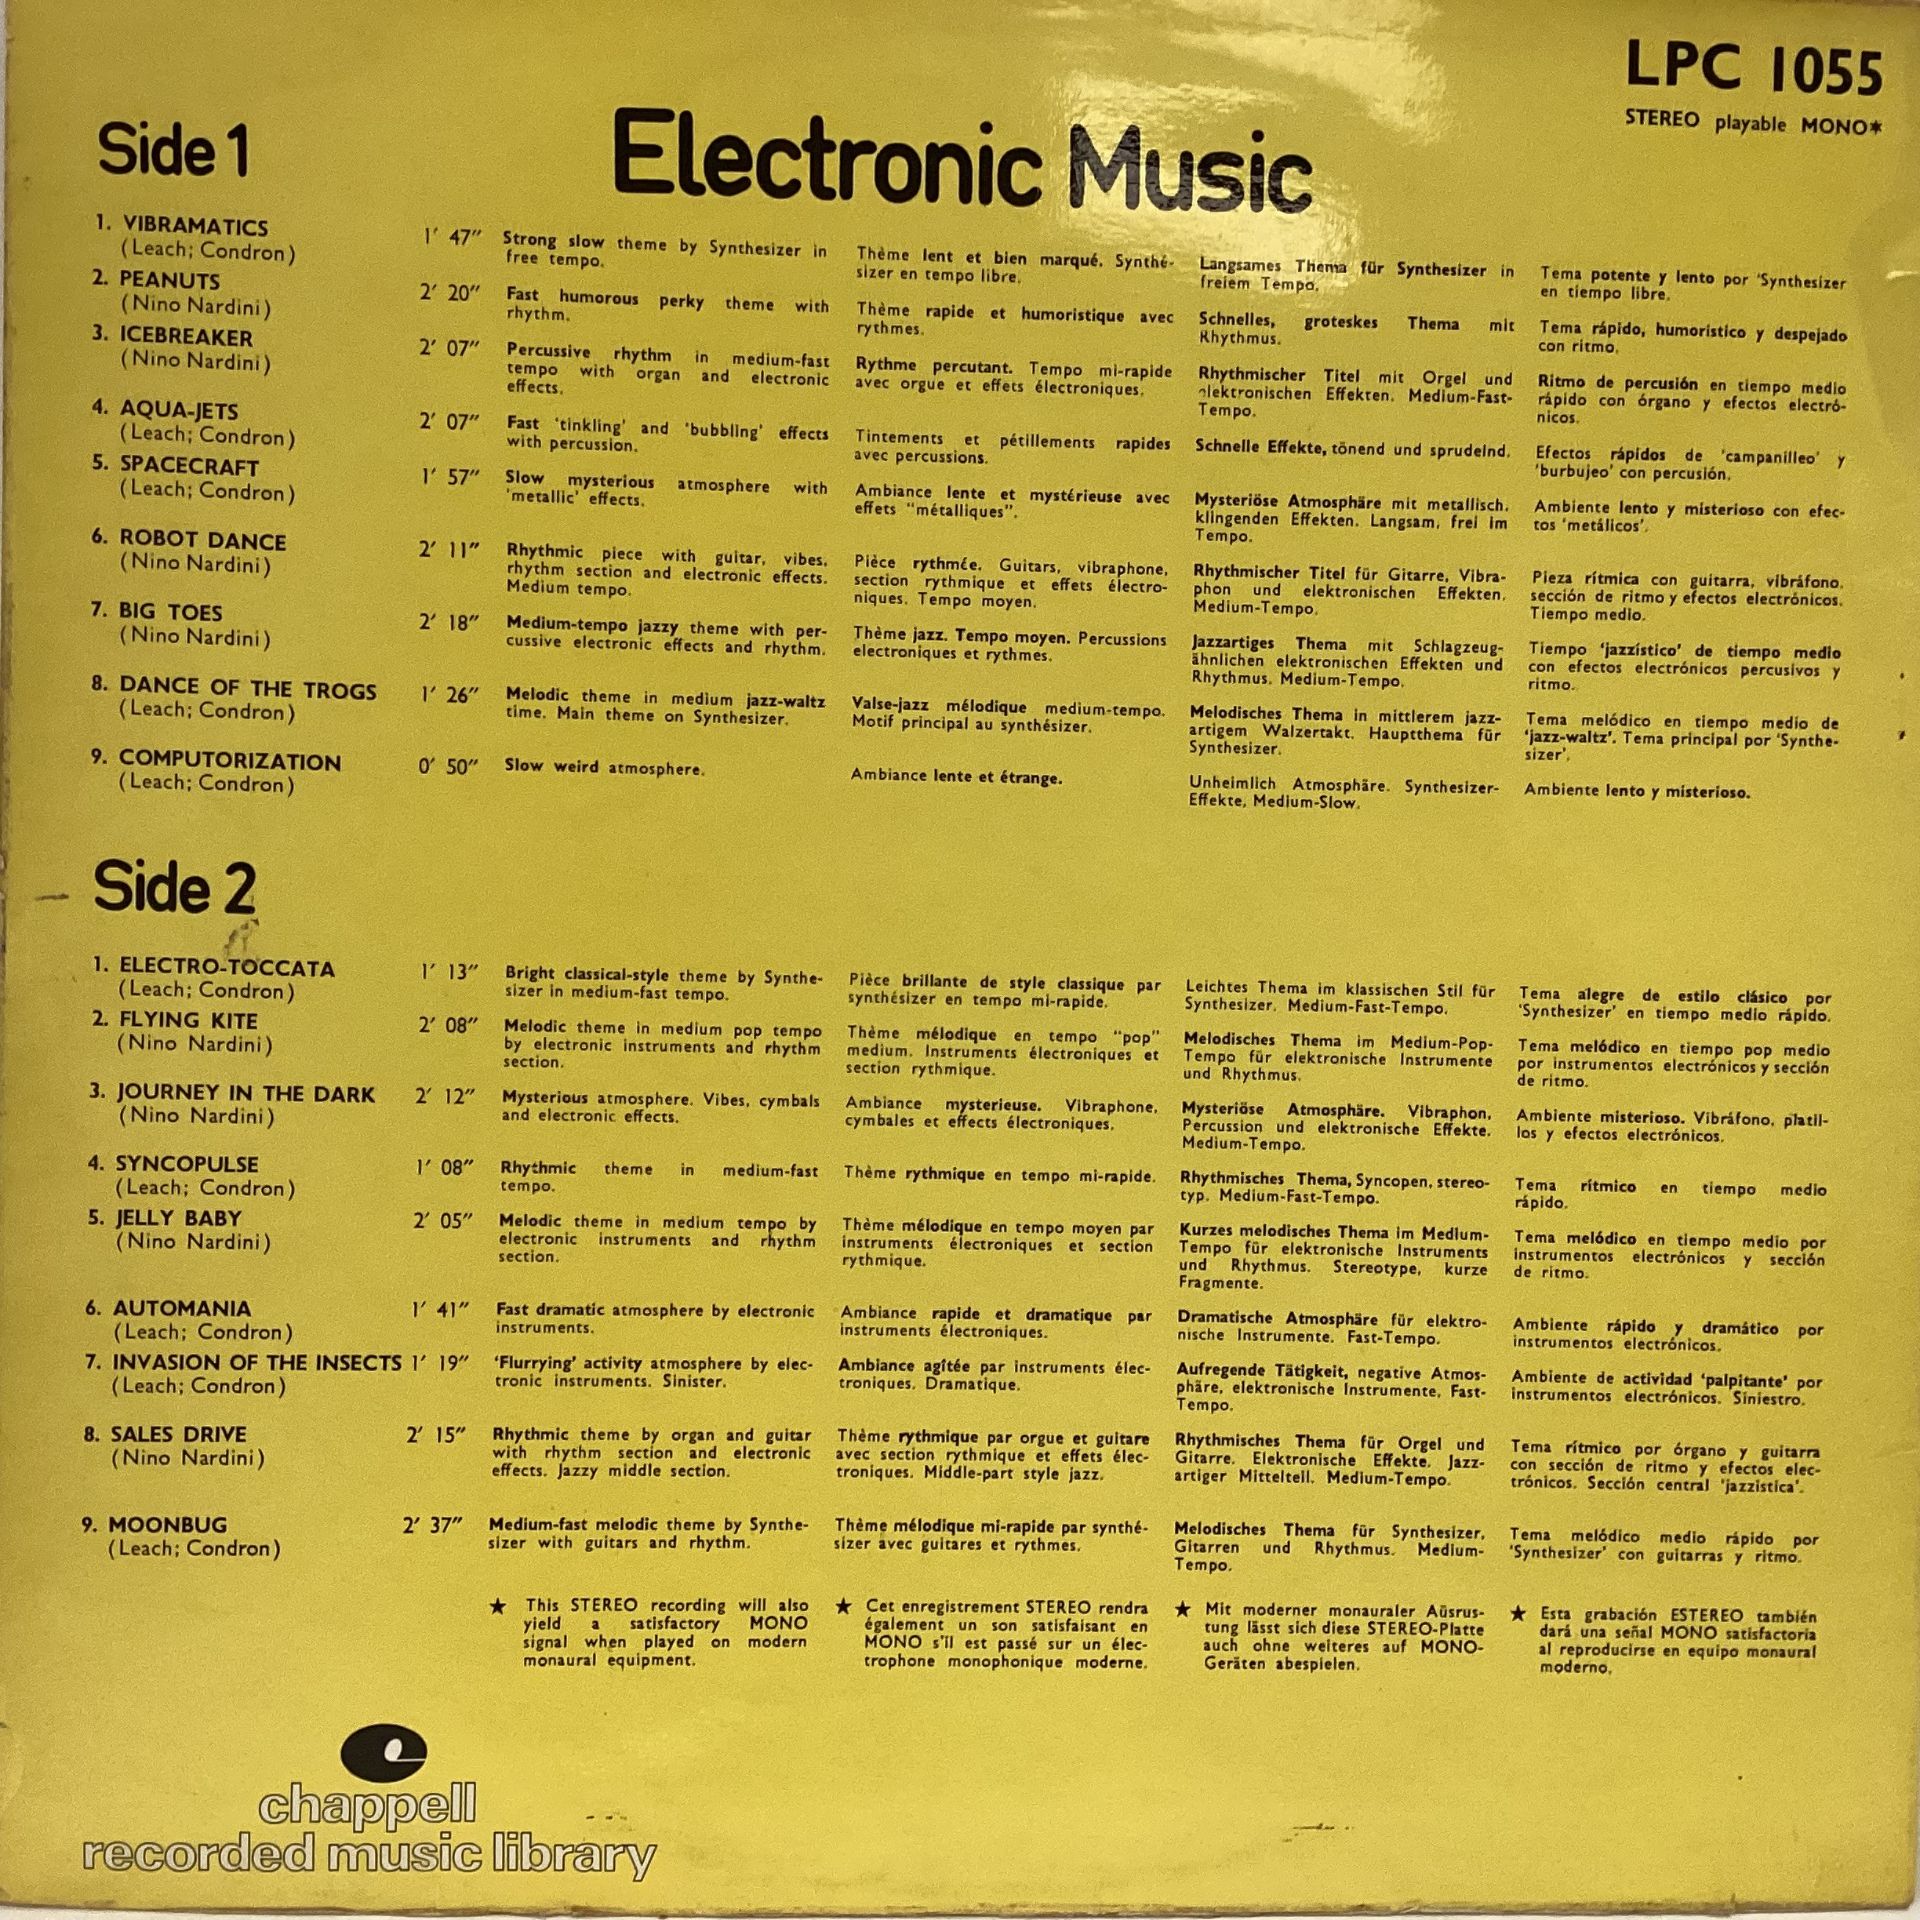 ELECTRONIC MUSIC VINYL LP RECORD. This vinyl is on Chappell Records No. LPC 1055 released in 1973 - Image 2 of 4